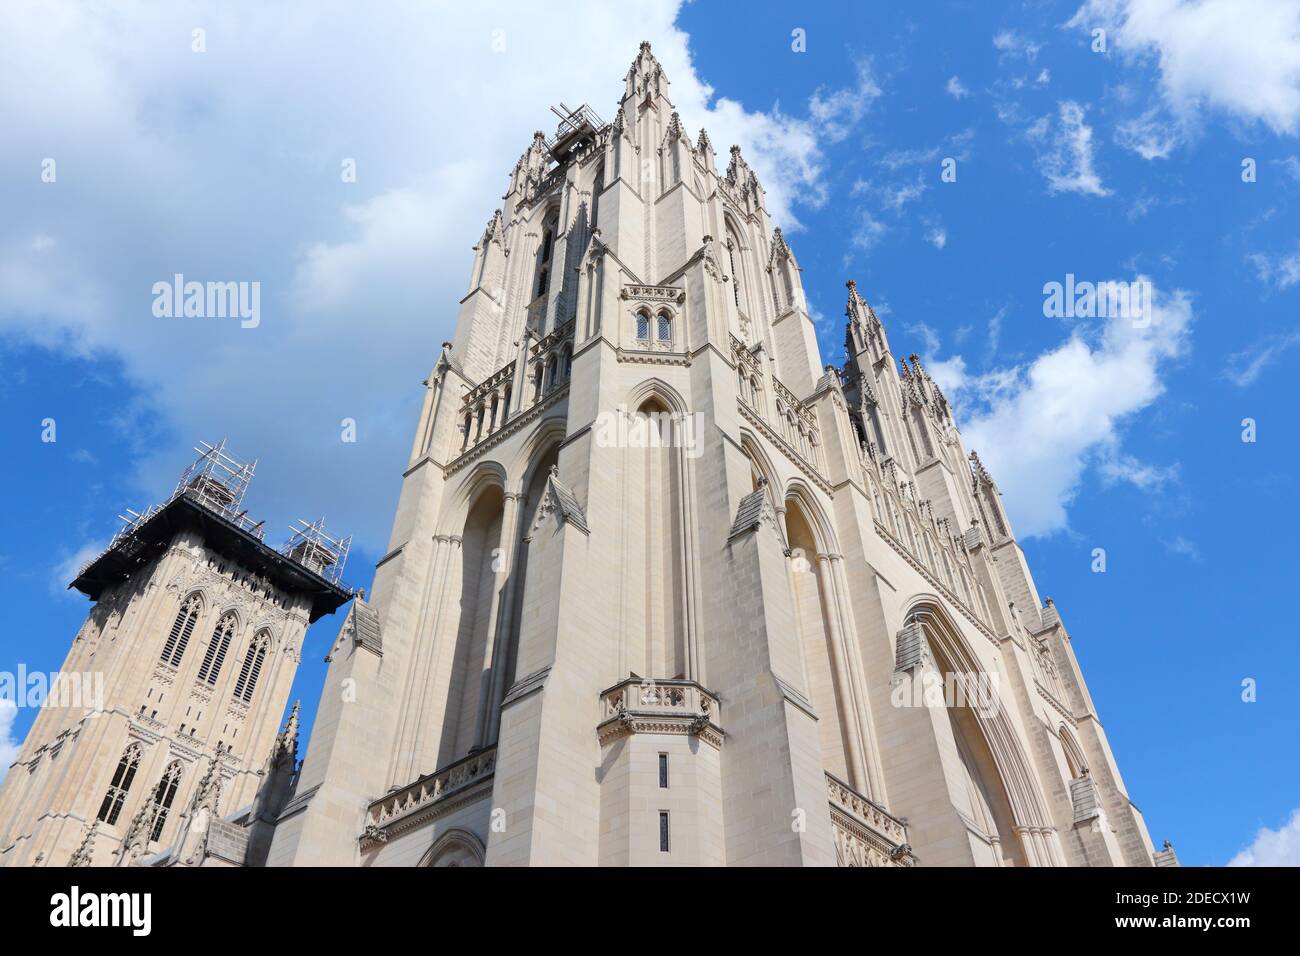 Washington National Cathedral. Tourist attraction in Washington D.C. United States. Stock Photo